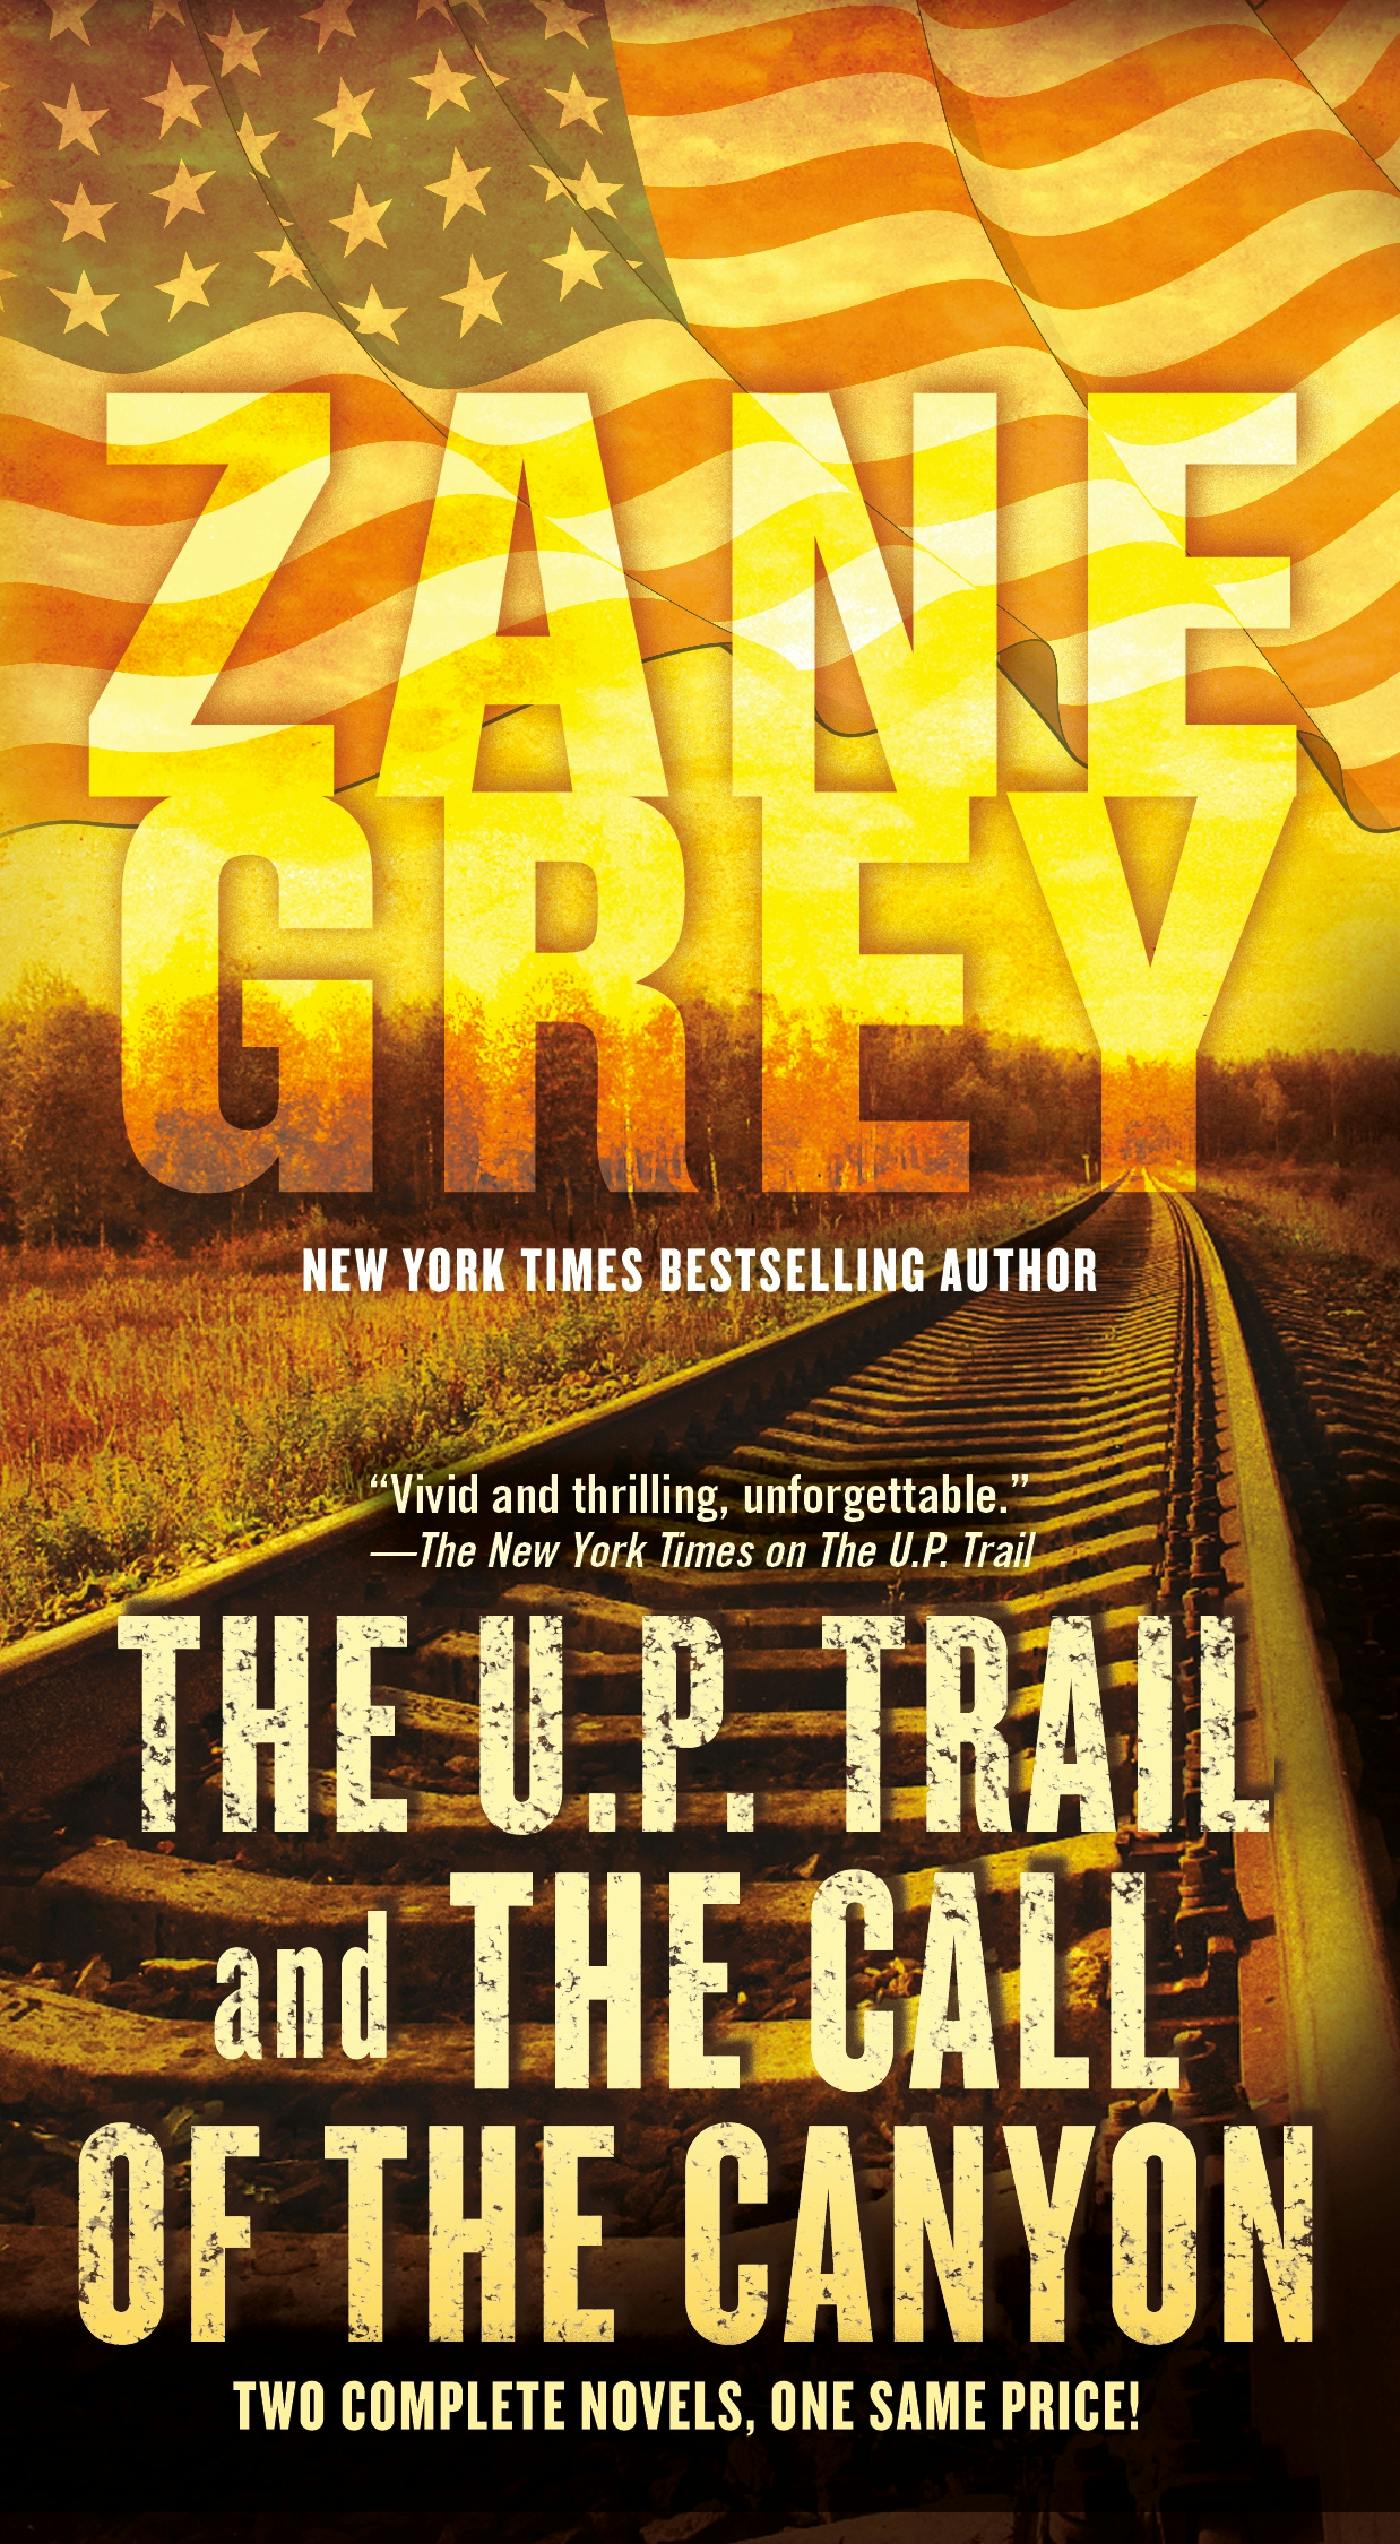 Cover for the book titled as: The U.P. Trail and The Call of the Canyon